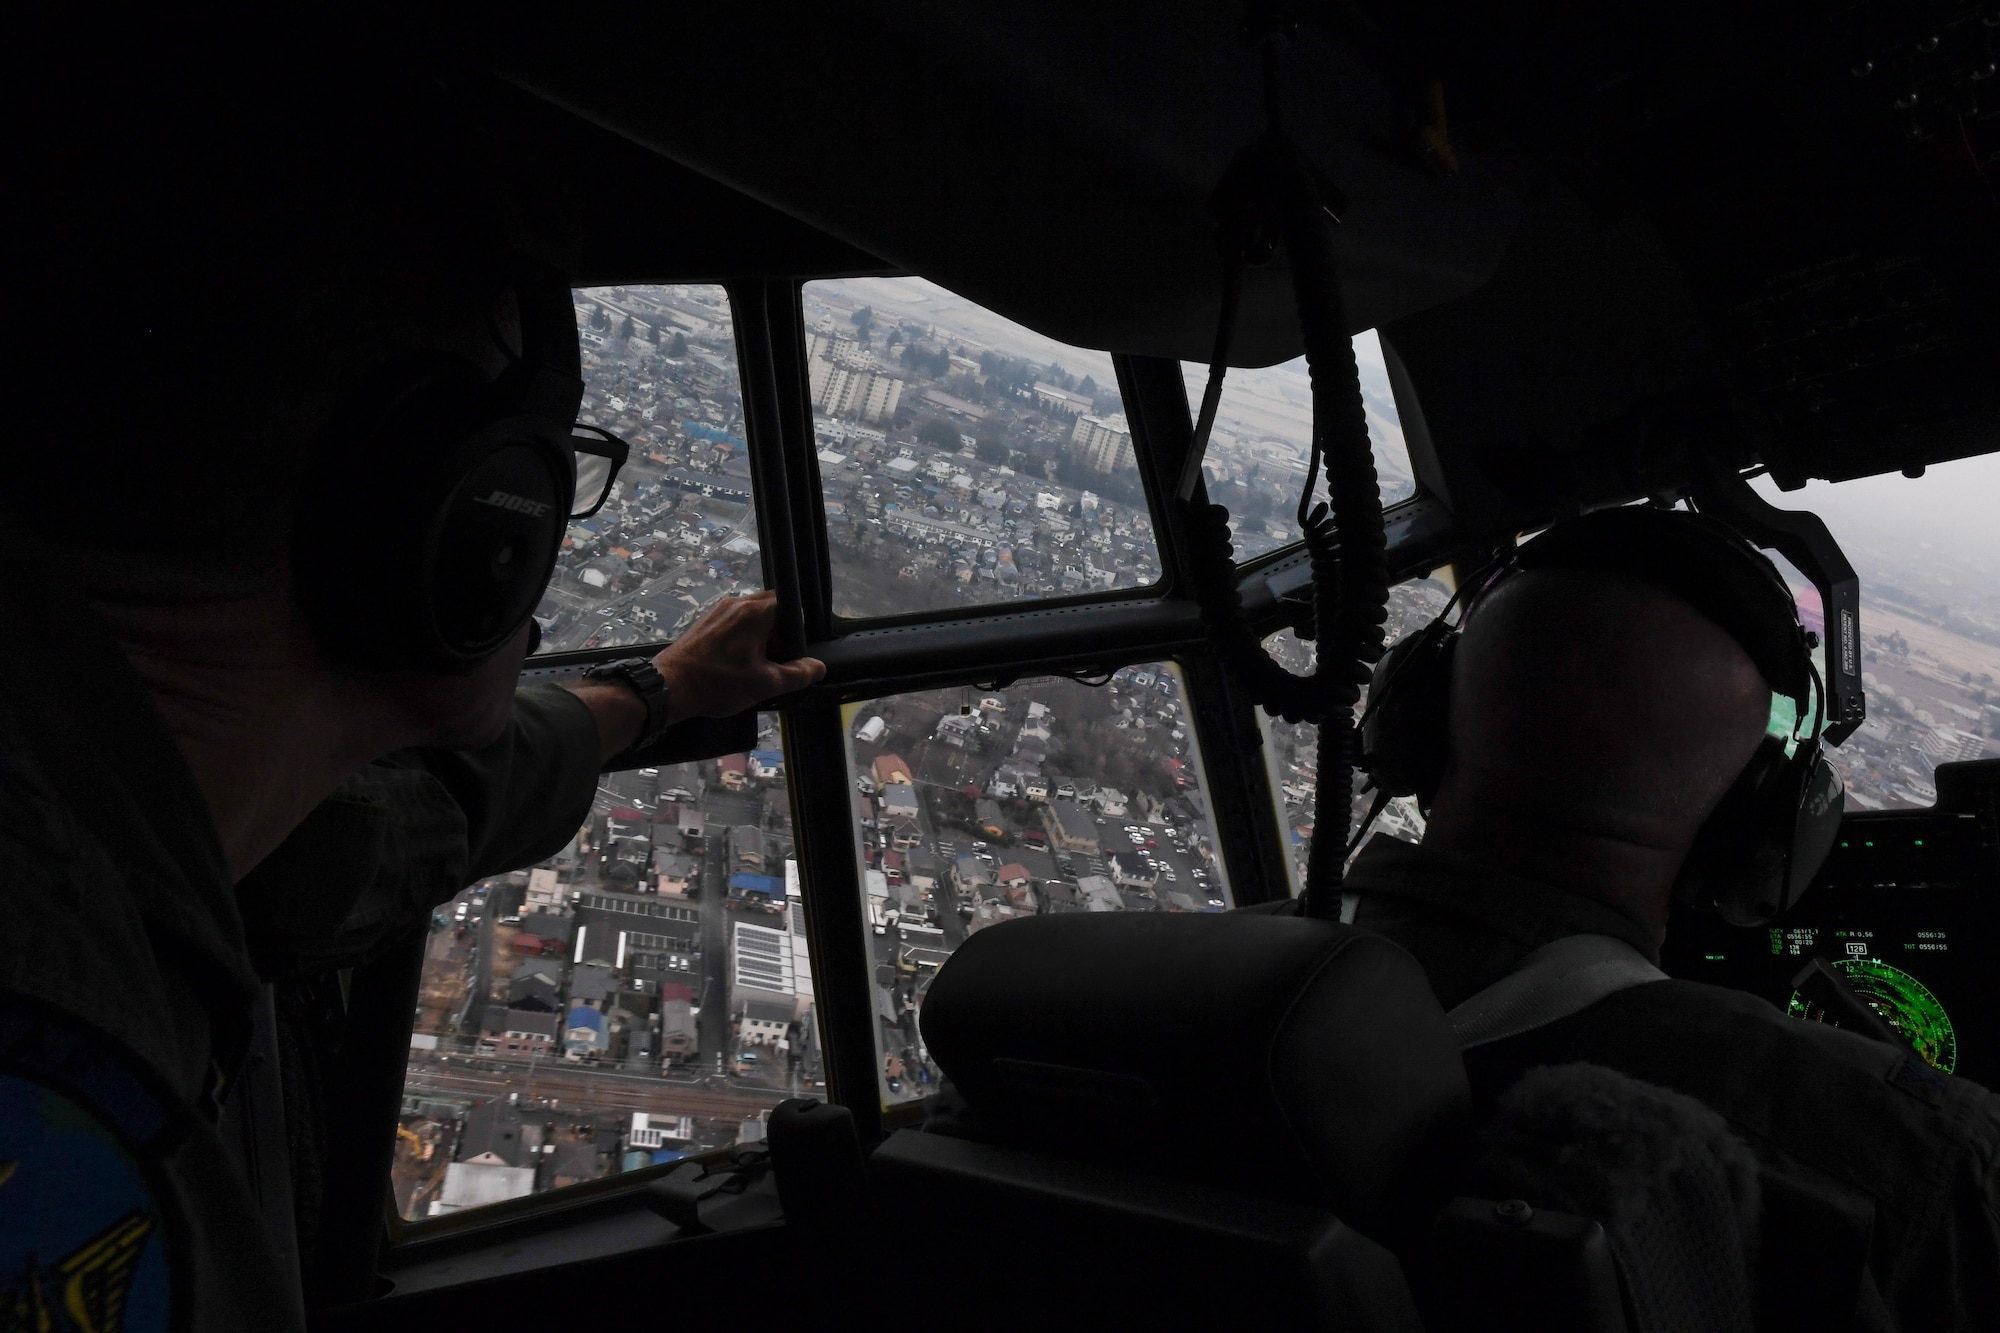 Col. Kenneth Moss, 374th Airlift Wing commander, approaches for a landing at Yokota Air Base, Japan, March 6, 2017. This is the first C-130J to be assigned to Pacific Air Forces. Yokota serves as the primary Western Pacific airlift hub for U.S. Air Force peacetime and contingency operations. Missions include tactical air land, airdrop, aeromedical evacuation, special operations and distinguished visitor airlift. (U.S. Air Force photo by Staff Sgt. Michael Smith)